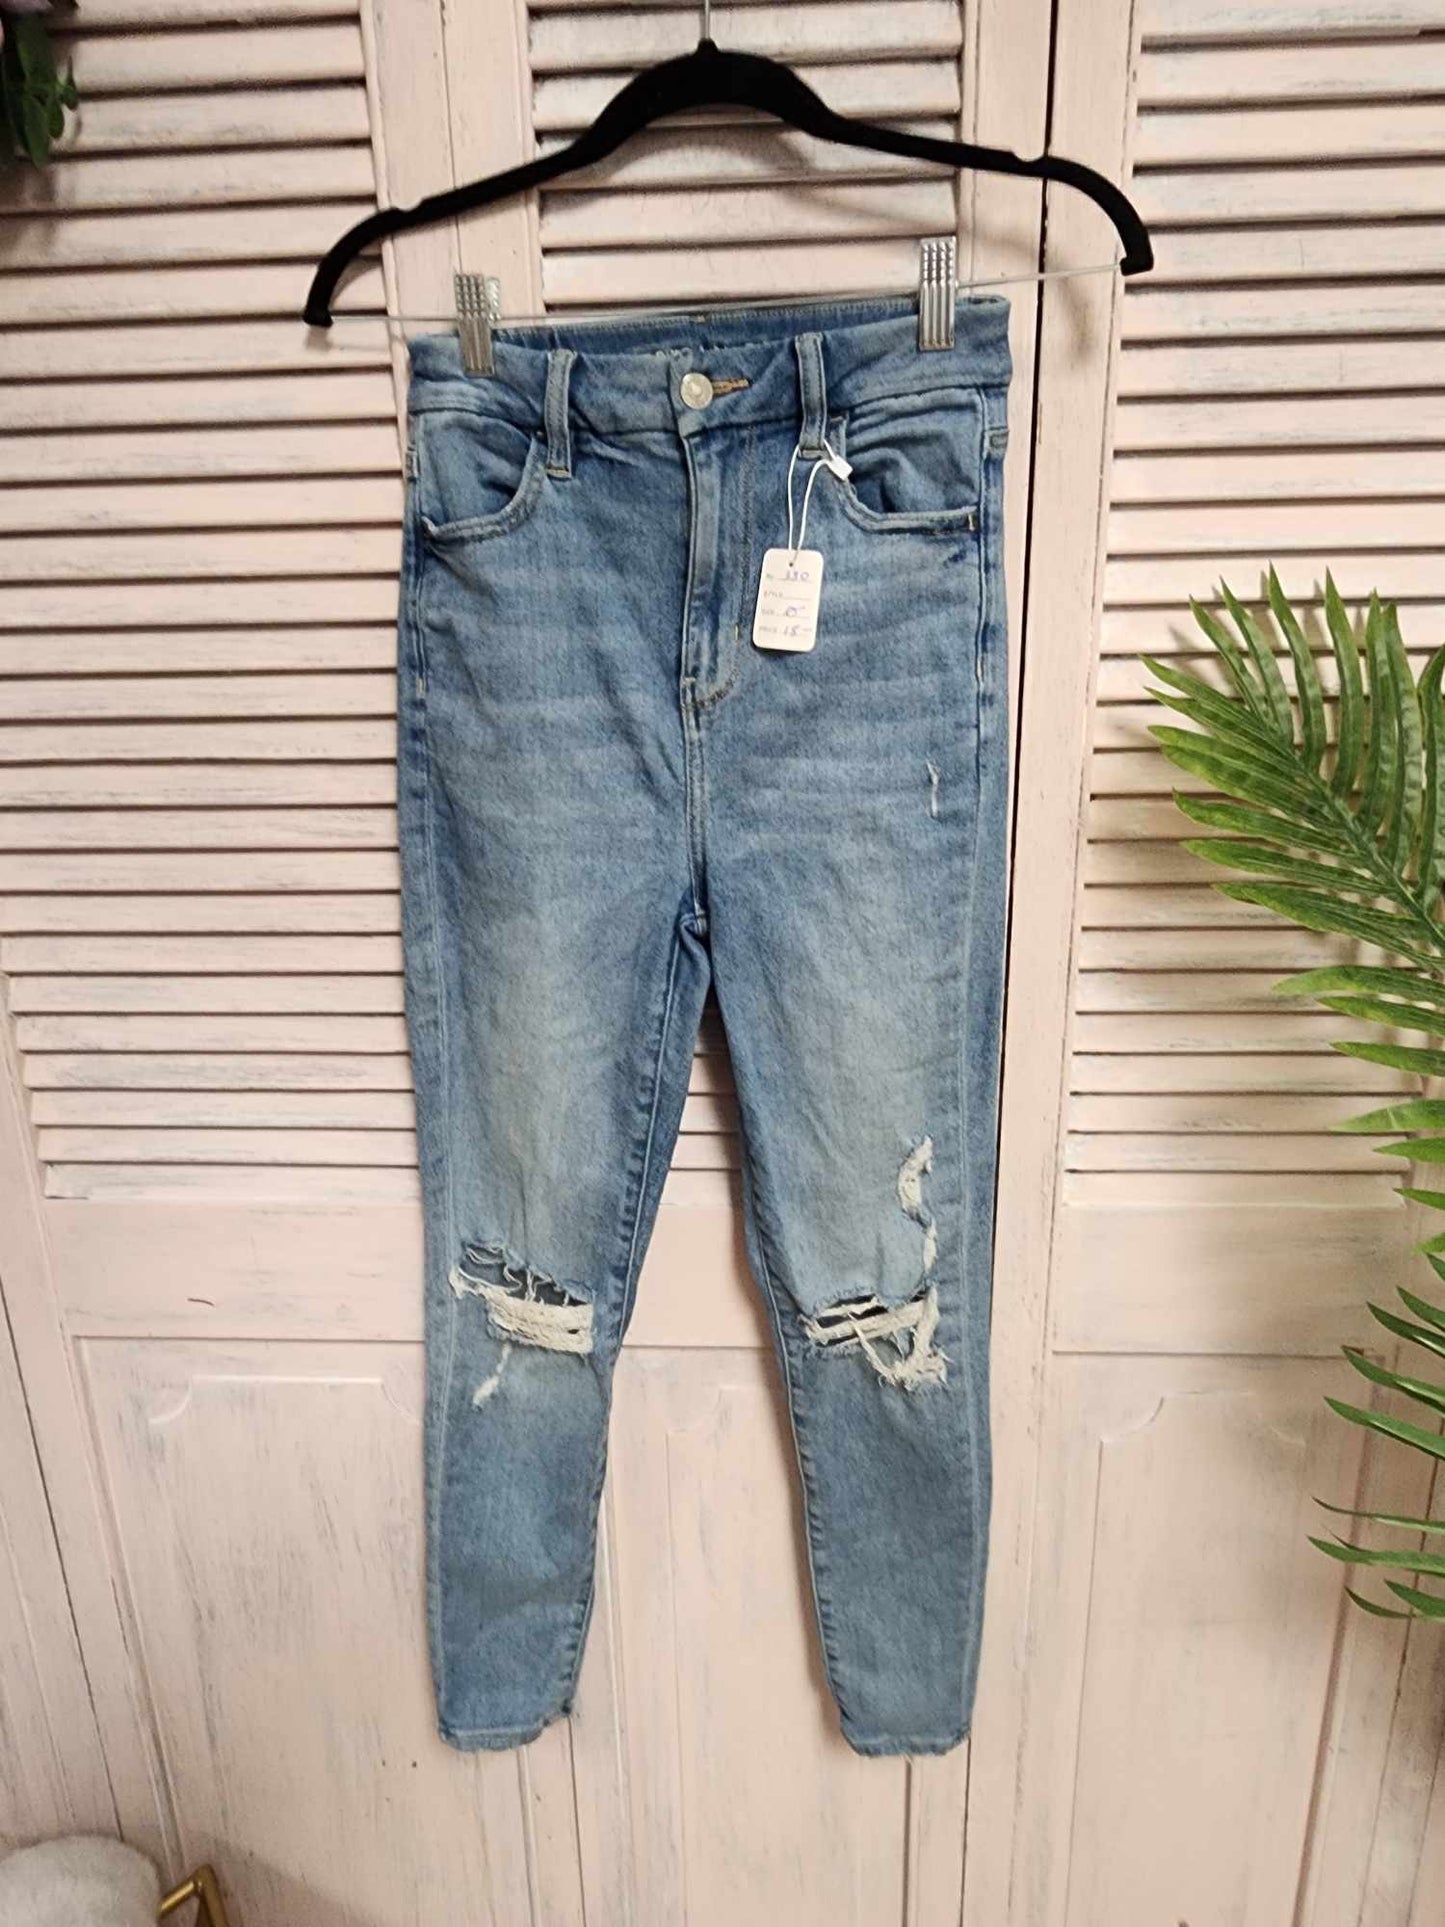 American Eagle Next Level Stretch Jeans